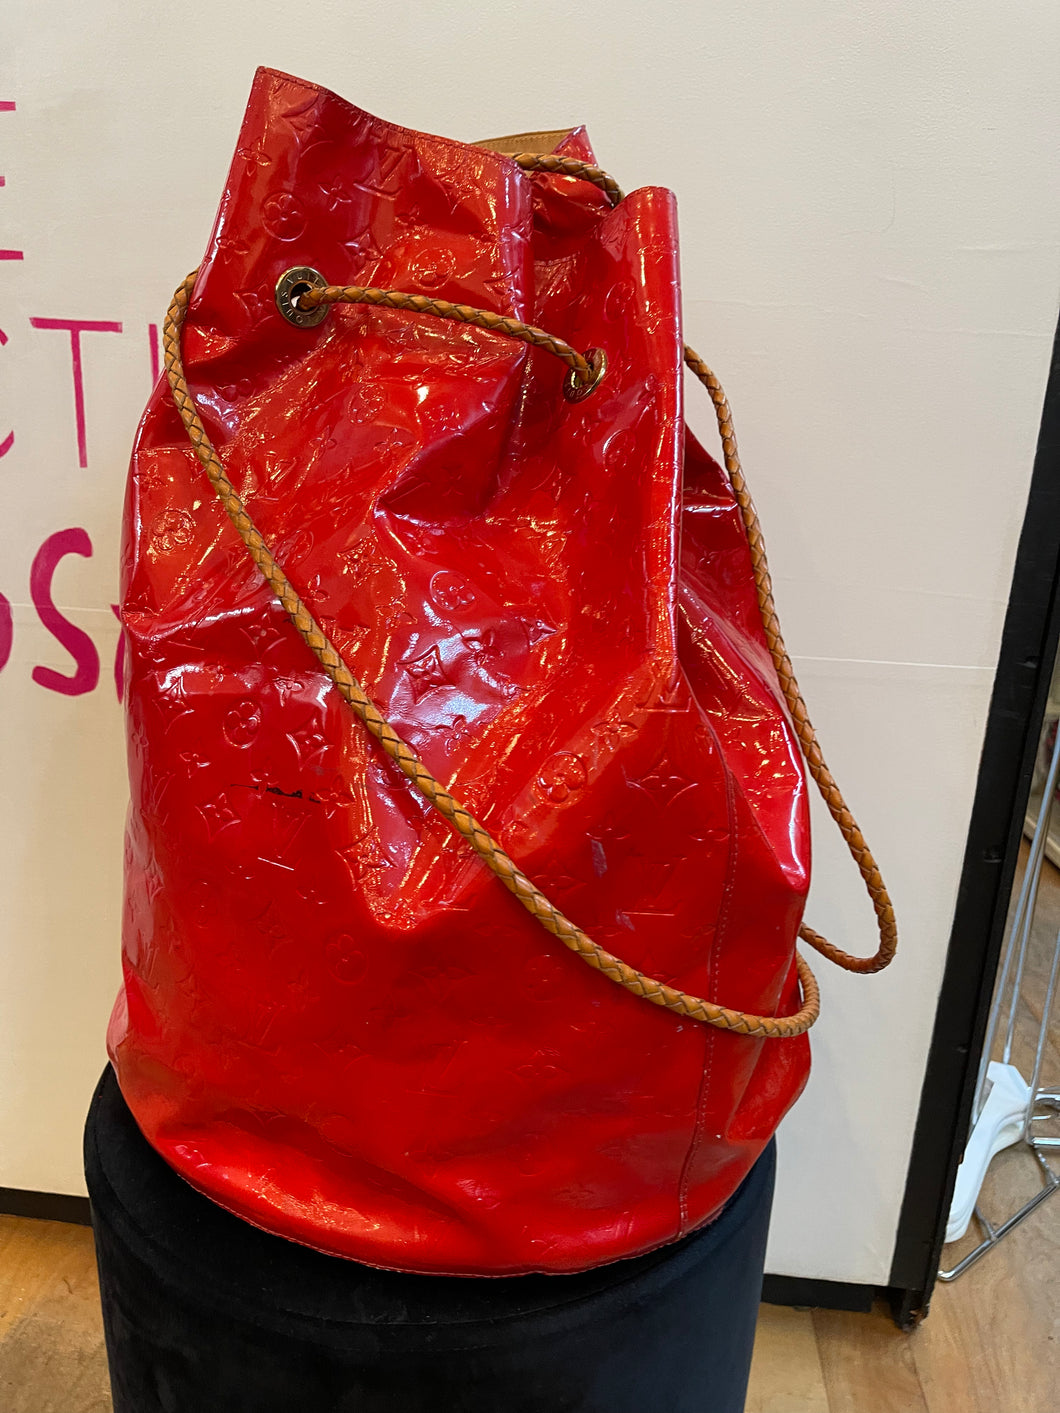 Limited edition, Louis Vuitton, red patent backpack – IndigoStyle Vintage